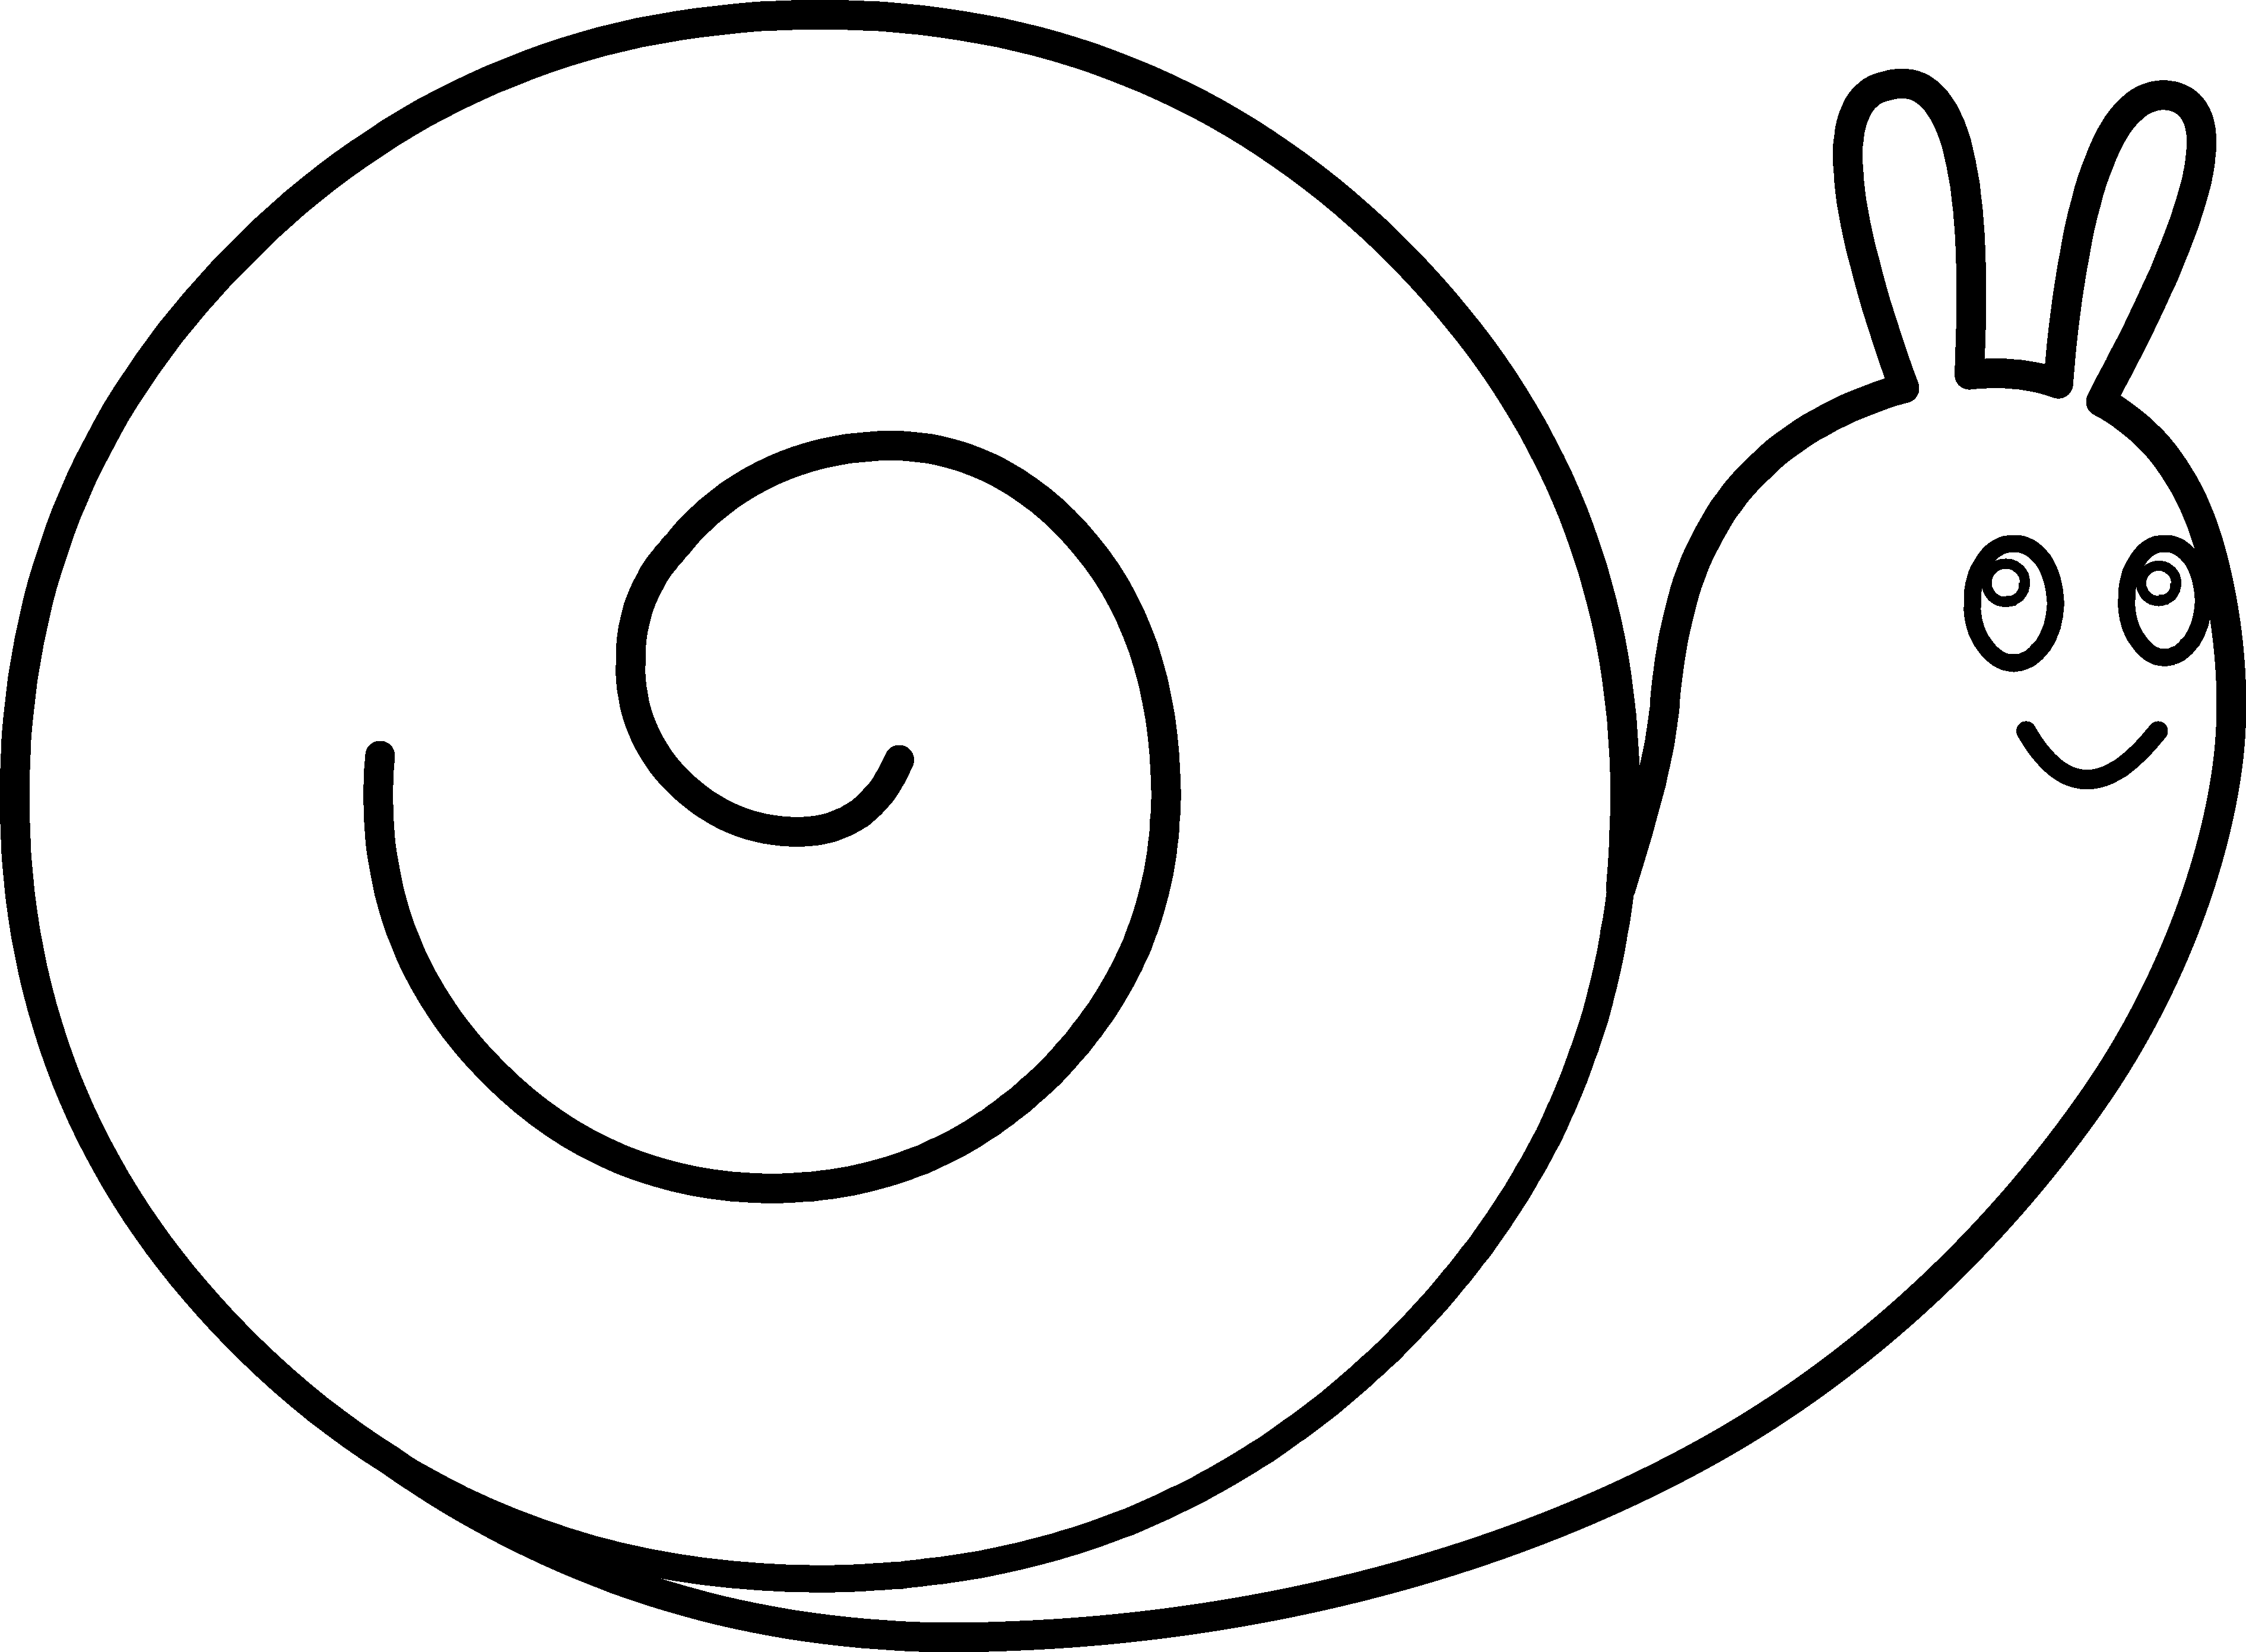 Black and White Snail